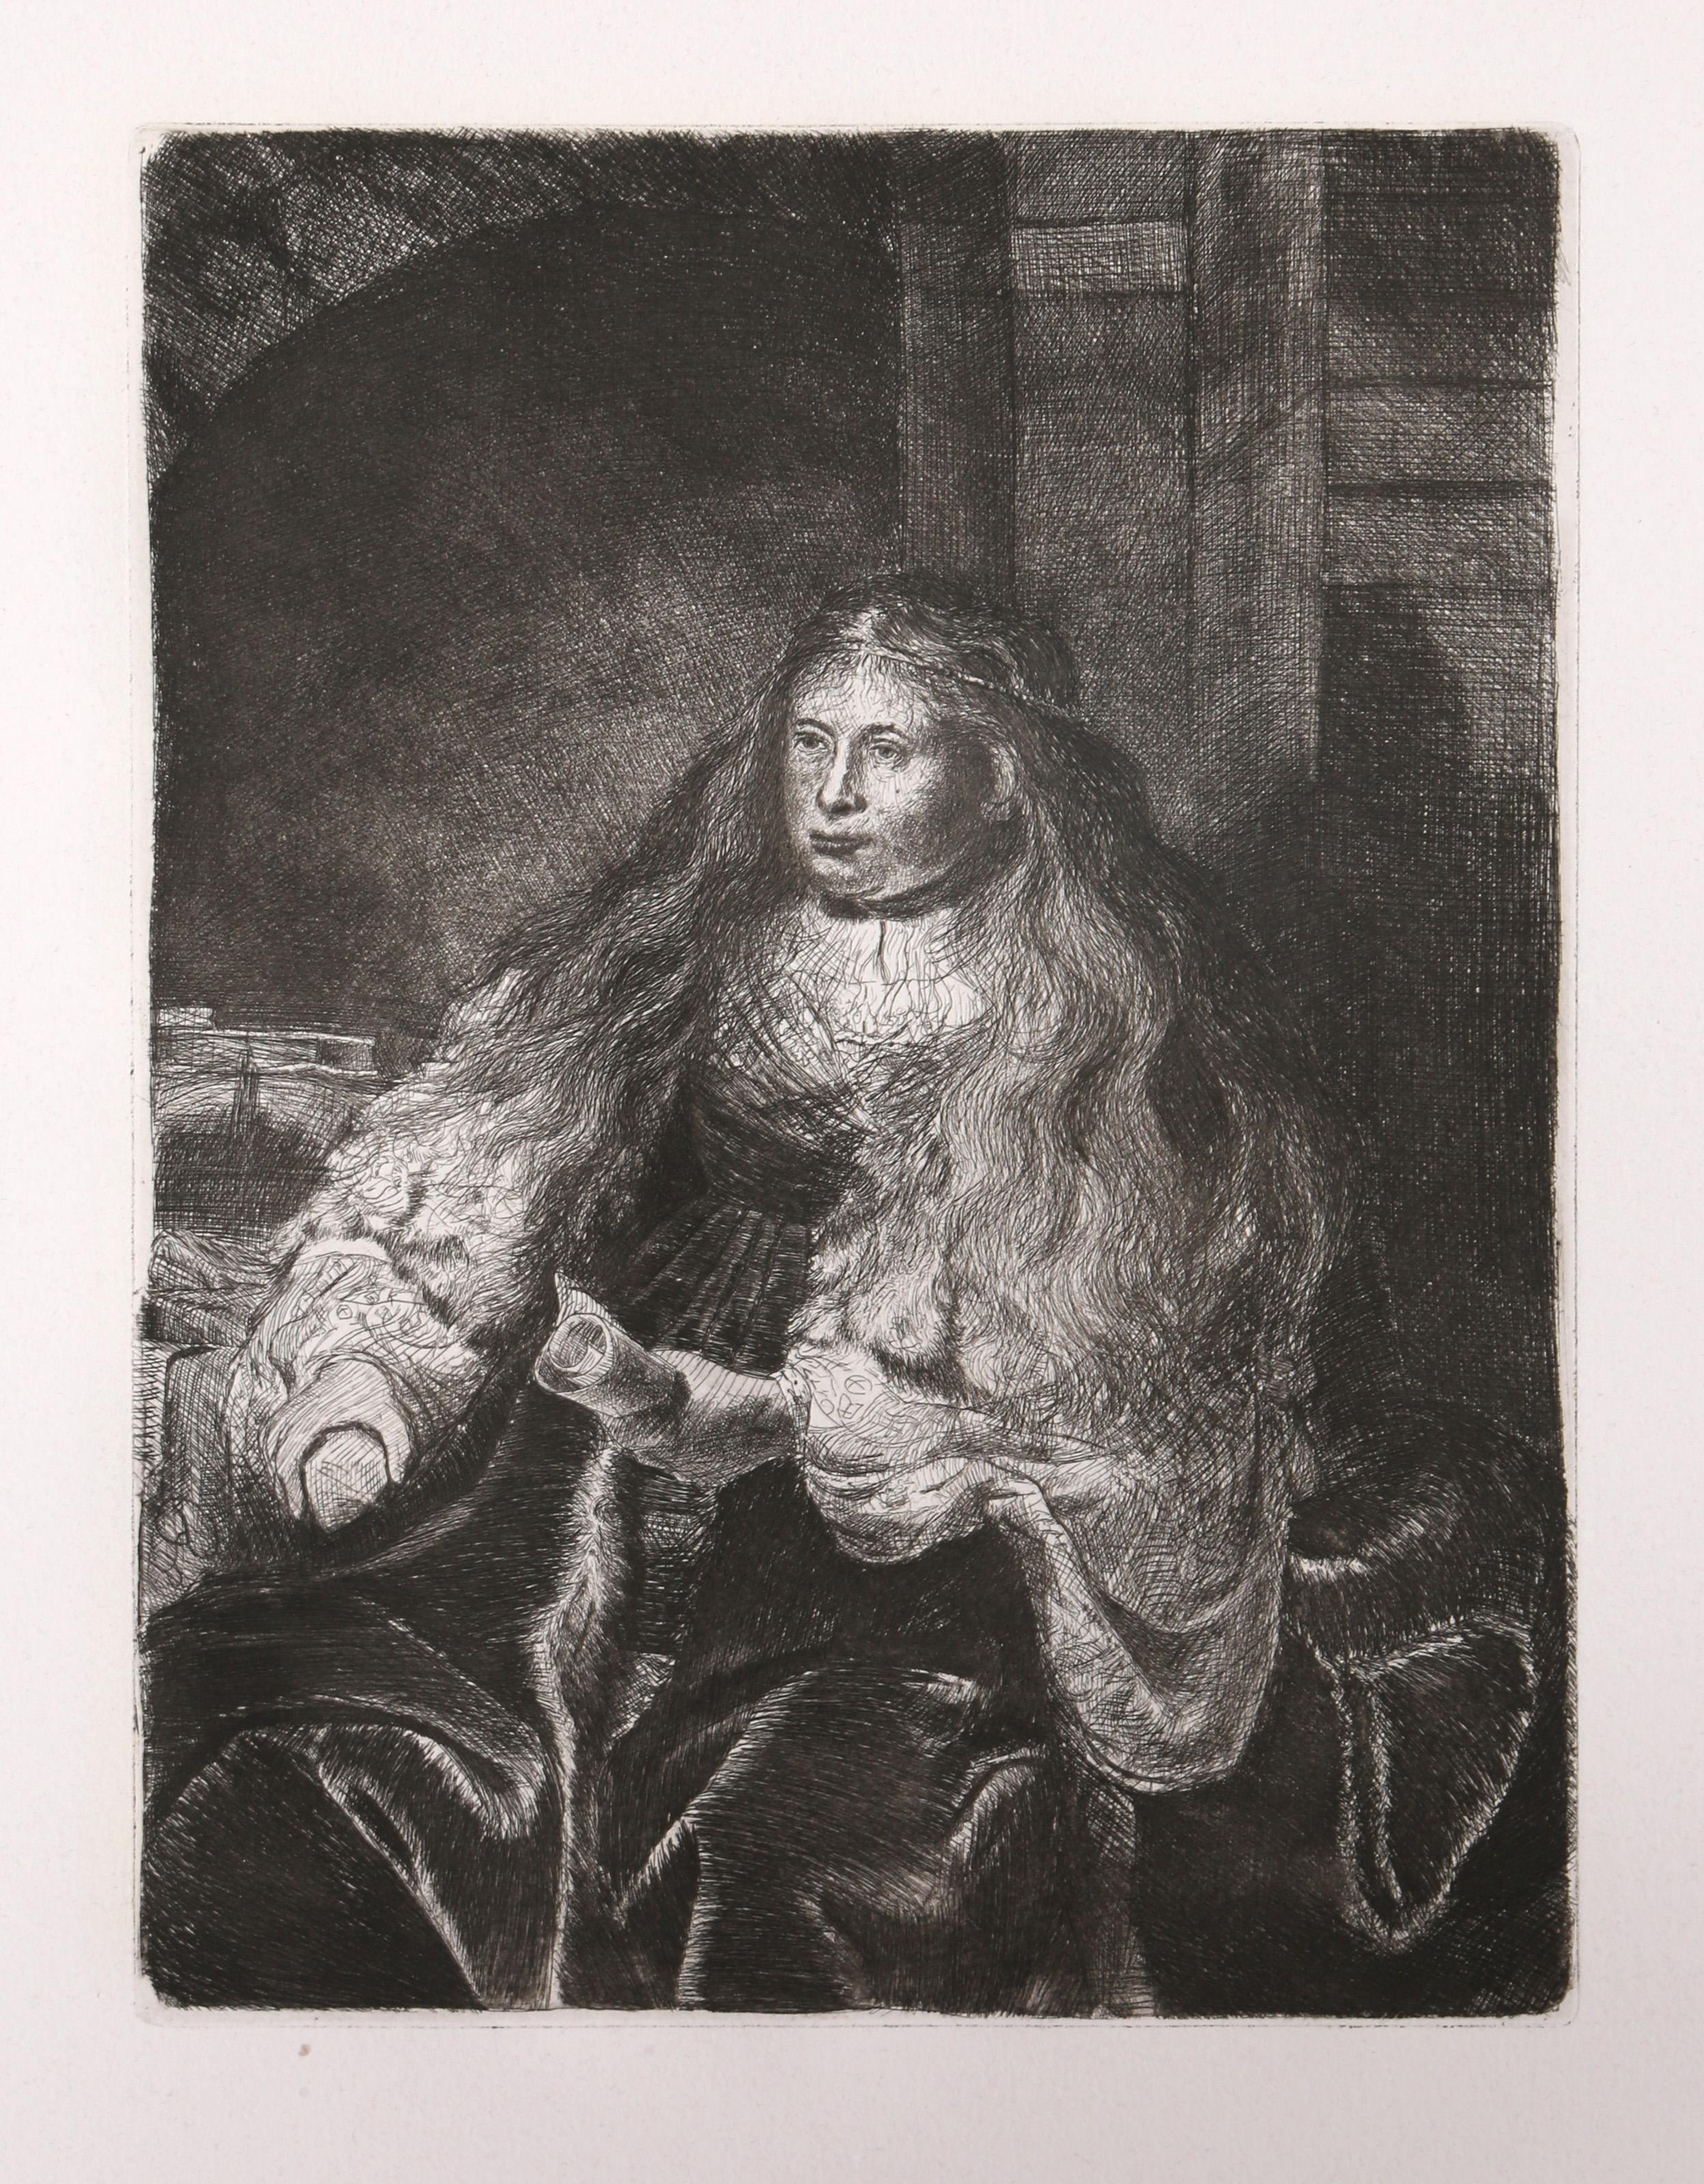  Rembrandt van Rijn, After by Amand Durand, Dutch (1606 - 1669) - The Great Jewish Bride (B340), Year: of Original: 1635, Medium: Etching, Image Size: 9 x 6.5 inches, Size: 17  x 13.5 in. (43.18  x 34.29 cm), Printer: Amand Durand, Description: